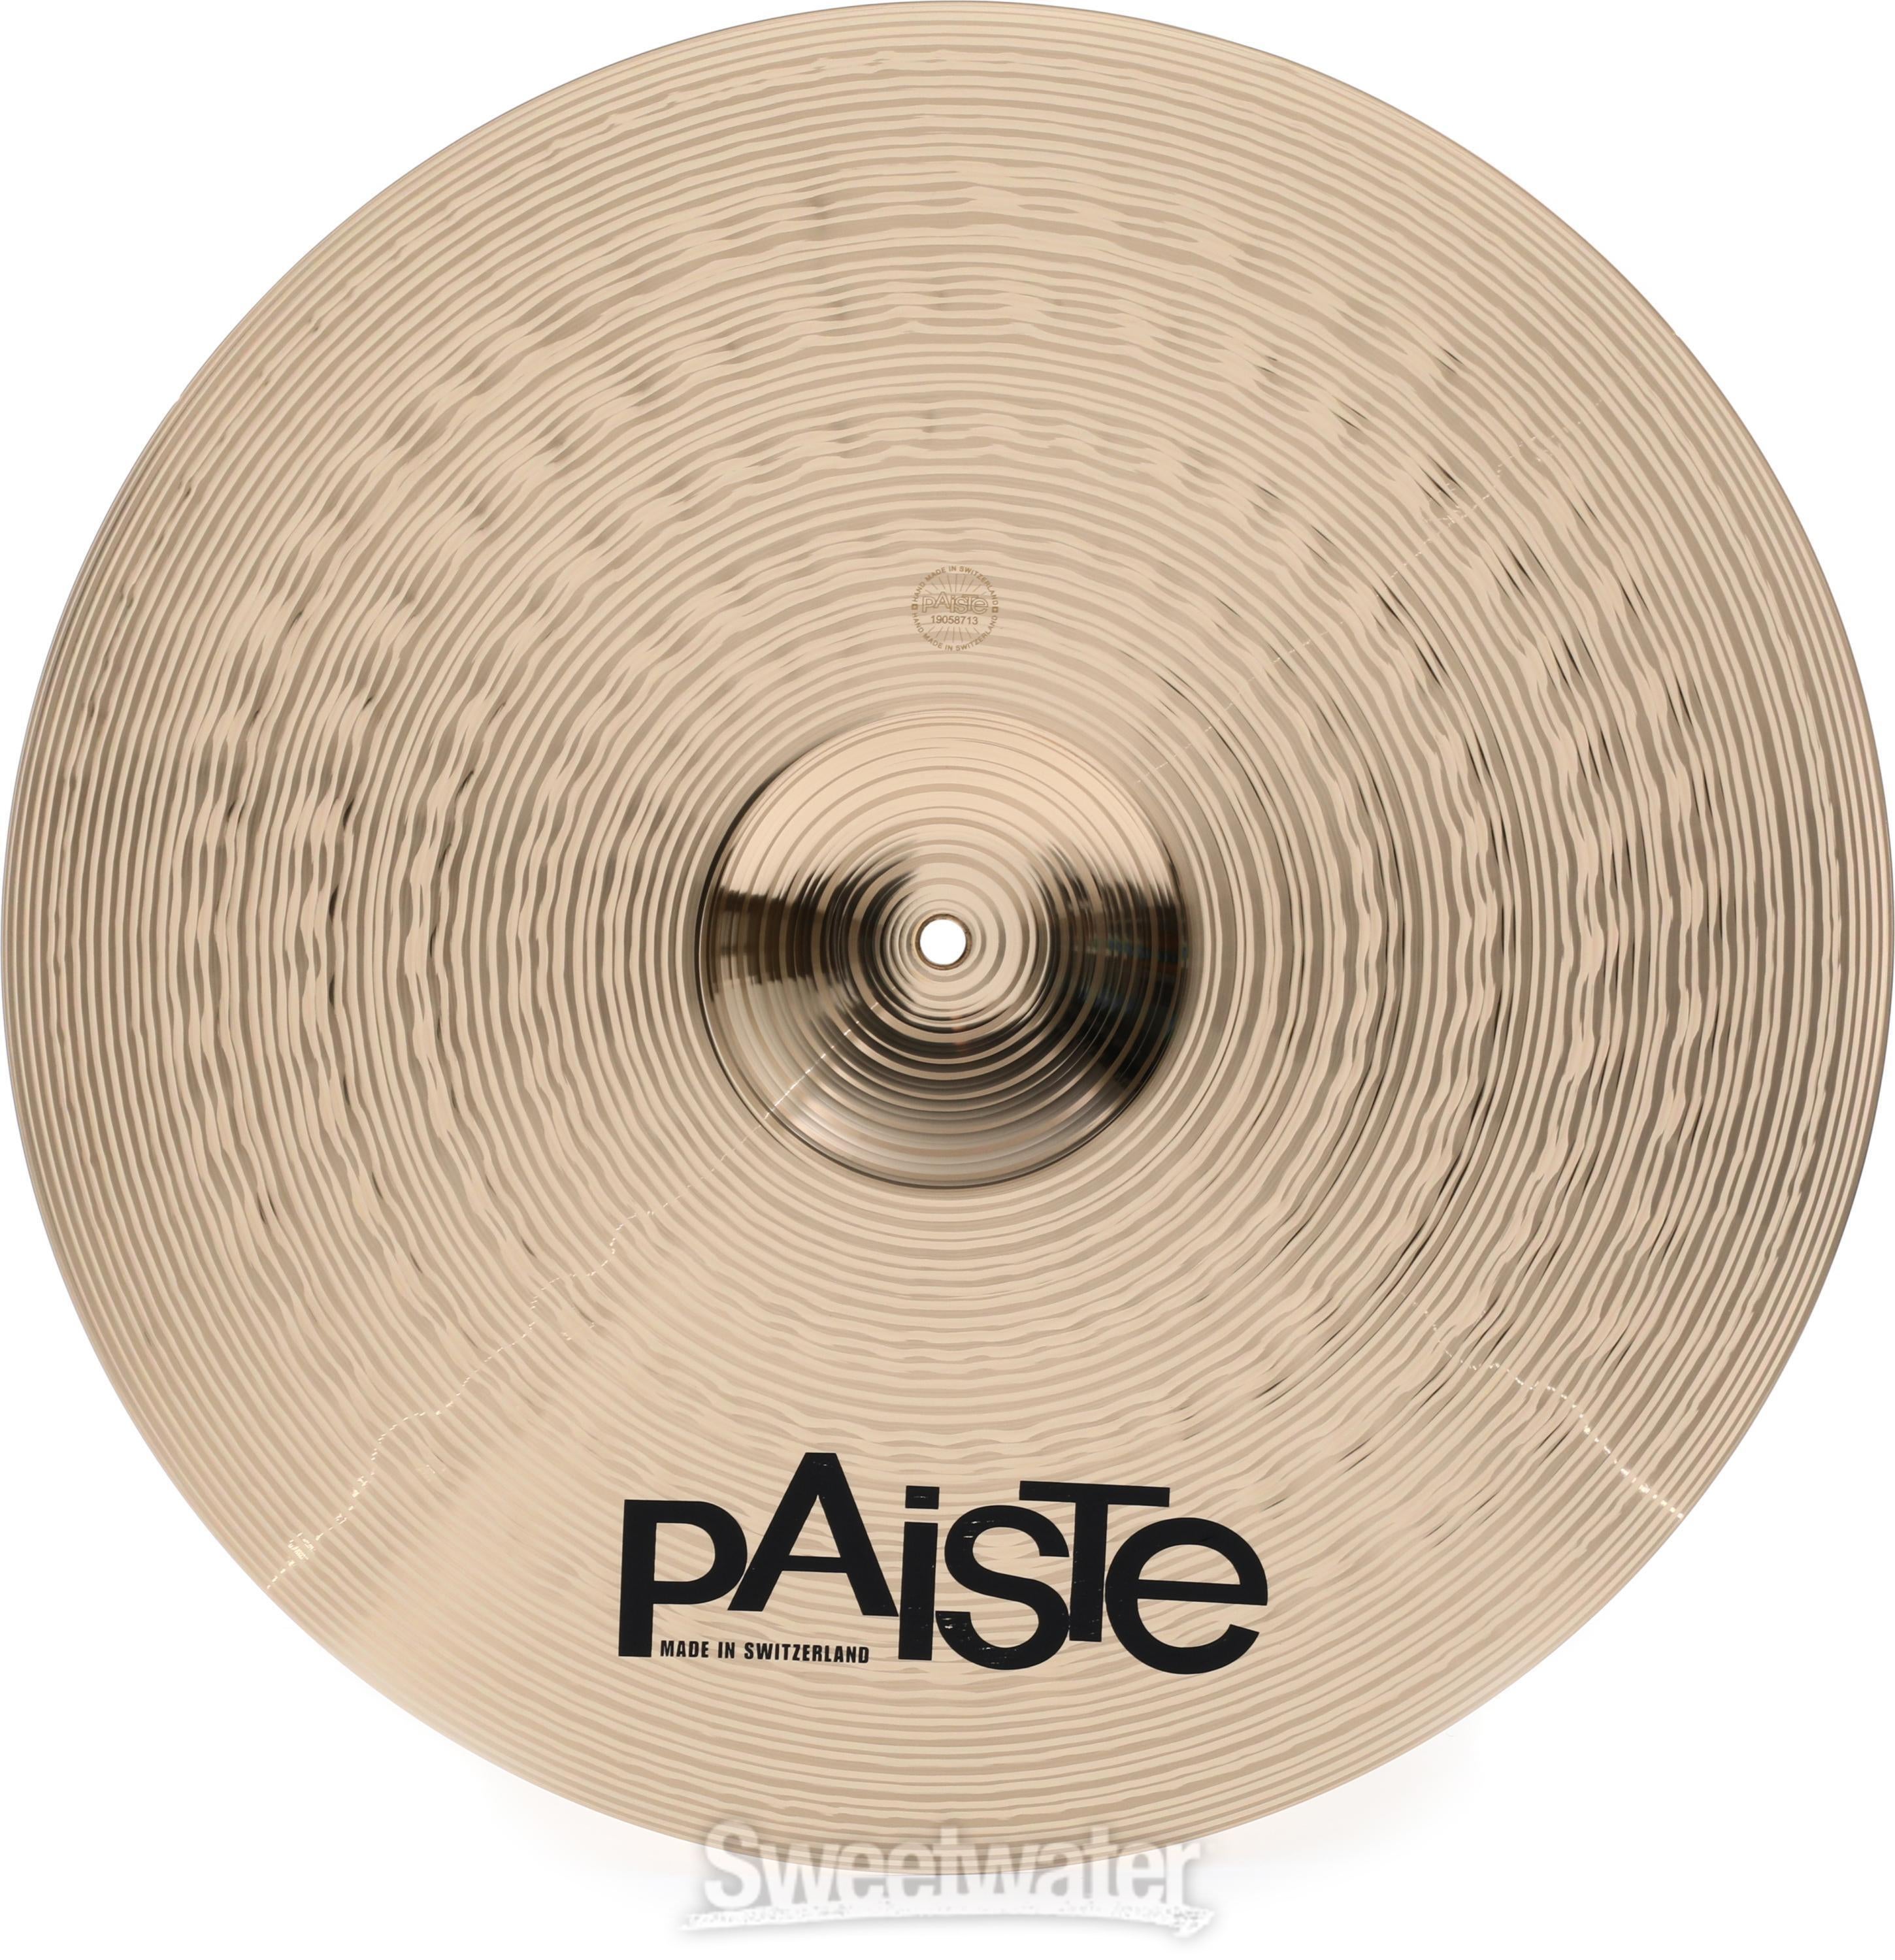 Paiste 20 inch Signature Full Ride Cymbal | Sweetwater